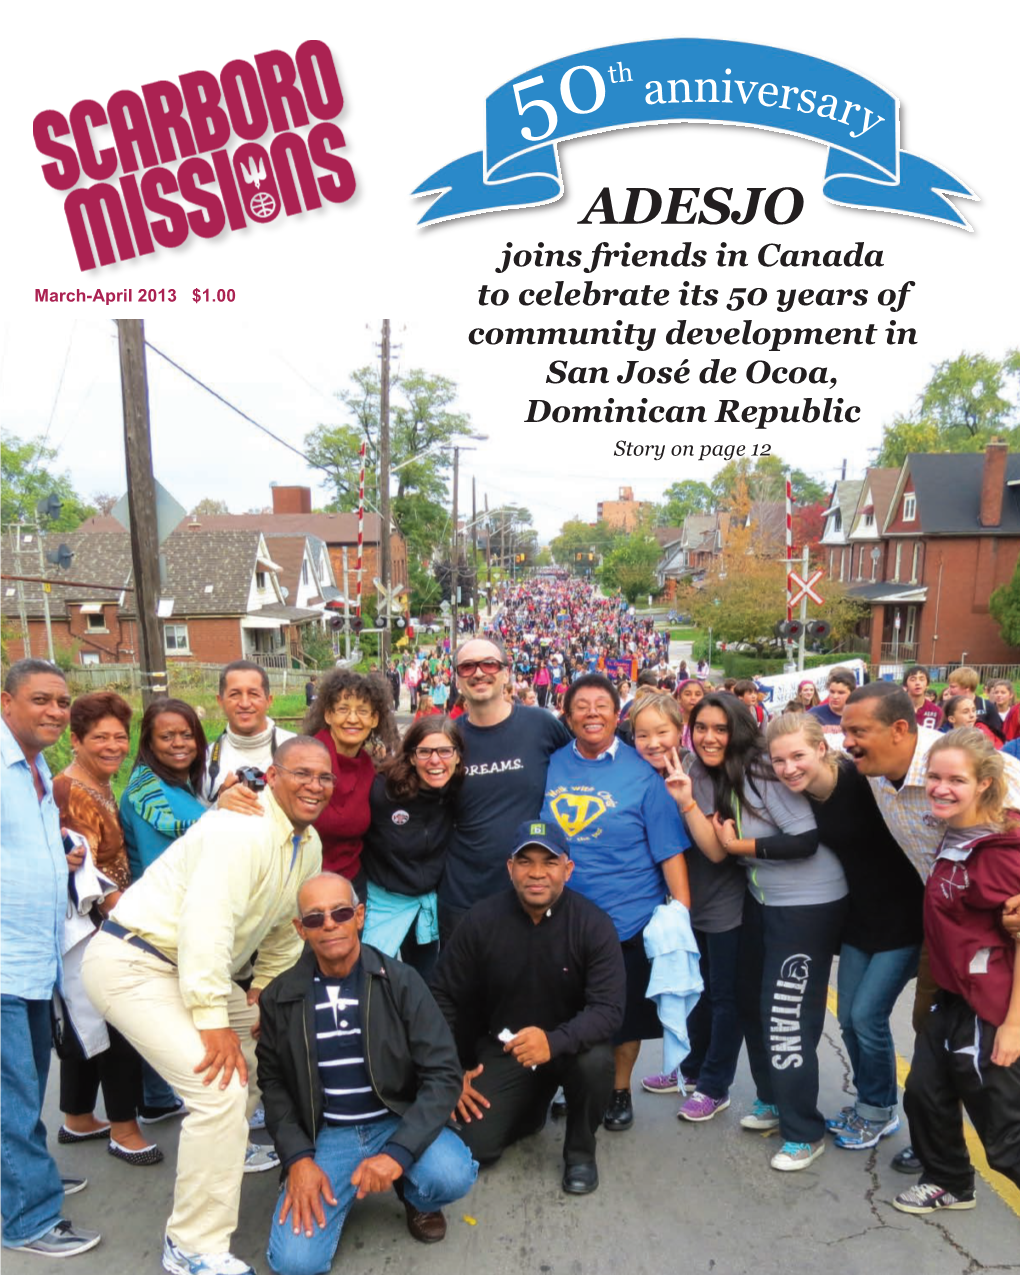 ADESJO Joins Friends in Canada March-April 2013 $1.00 to Celebrate Its 50 Years of Community Development in San José De Ocoa, Dominican Republic Story on Page 12